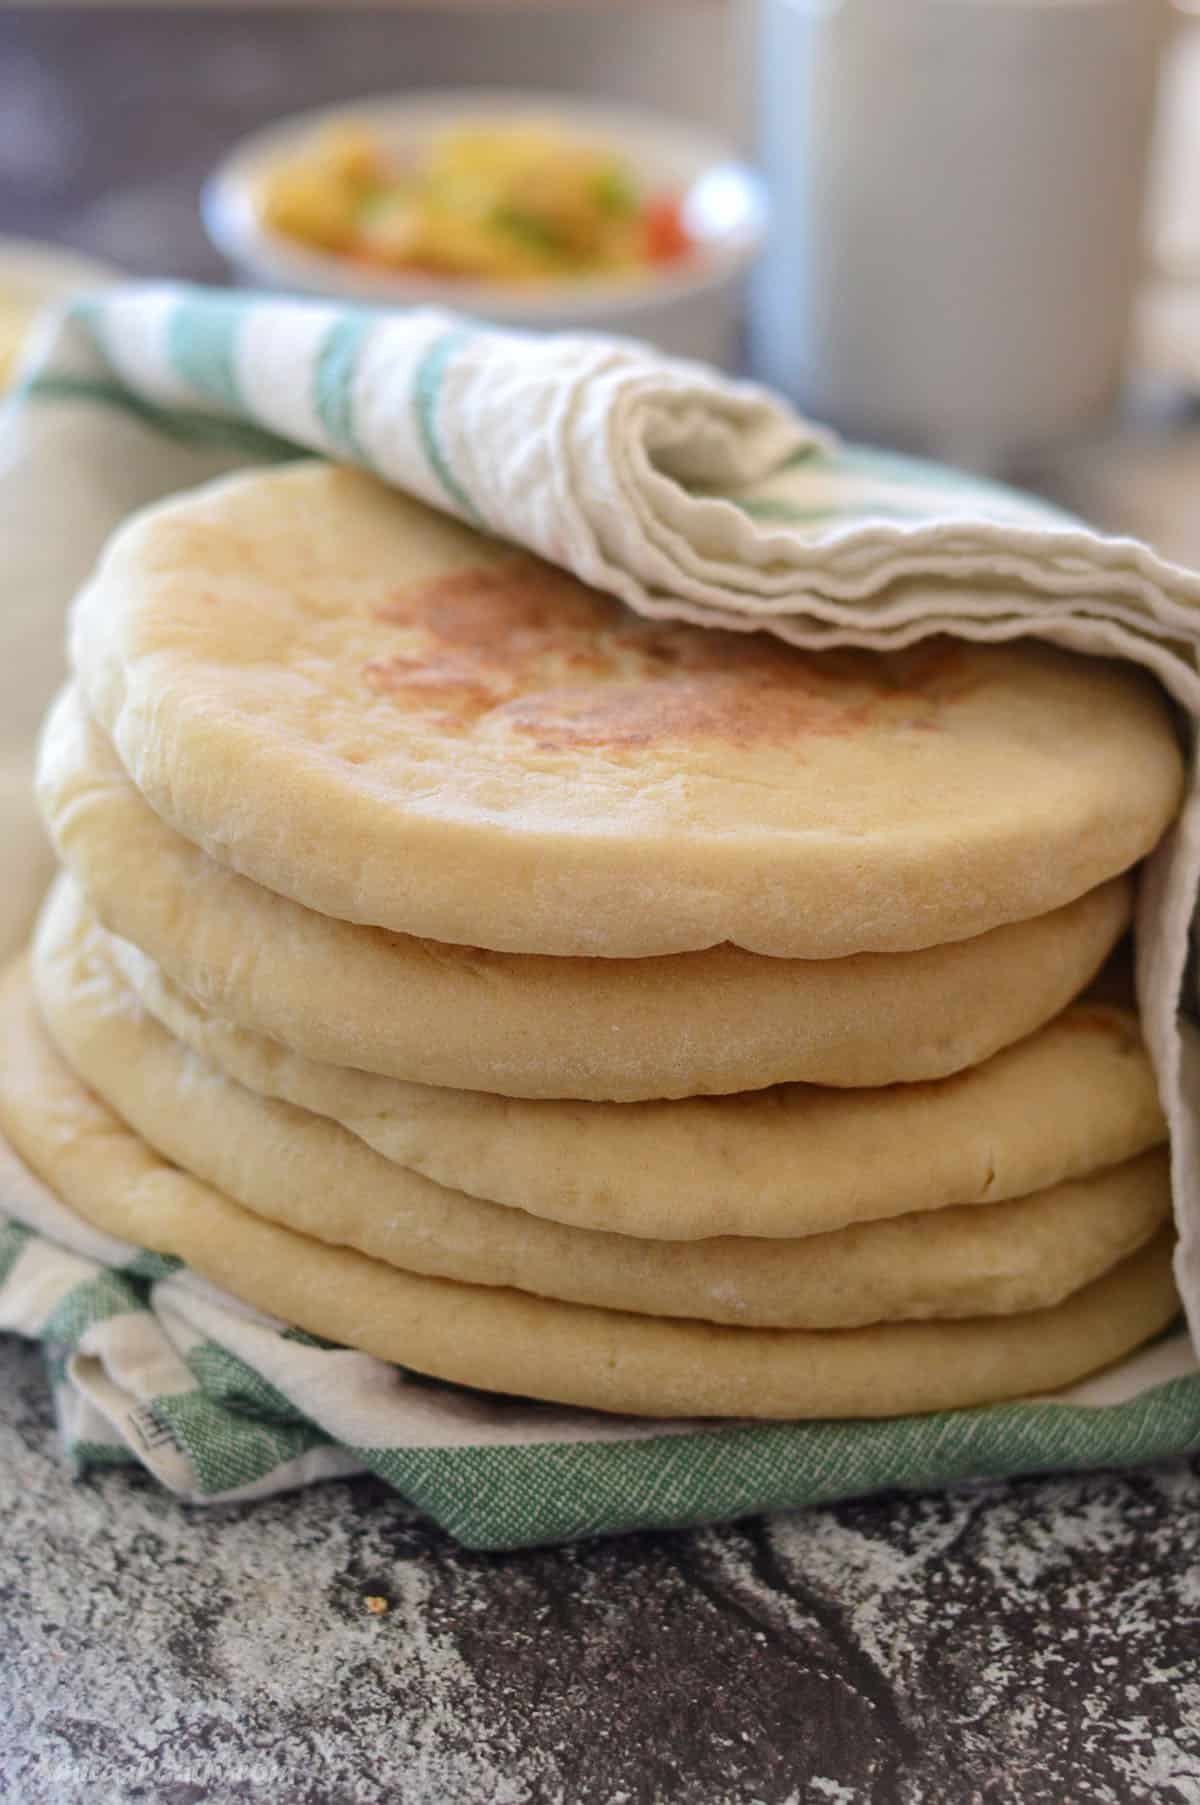 A stack of soft pitas covered with a kitchen towel.